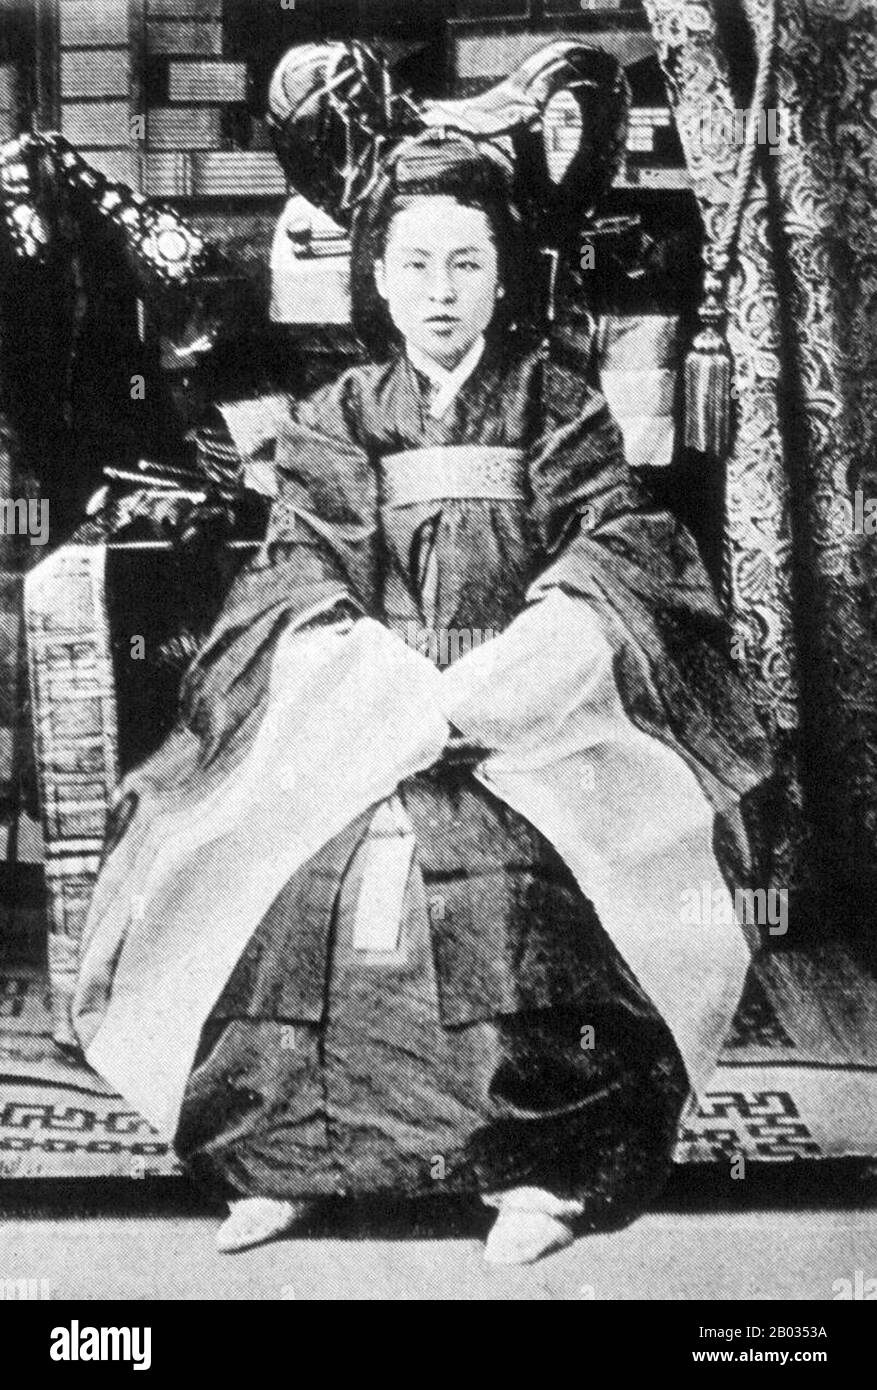 The government of Meiji Japan considered Queen Min an obstacle to its overseas expansion. Efforts to remove her from the political arena, orchestrated through failed rebellions prompted by the father of King Gojong, the Heungseon Daewongun (an influential regent working with the Japanese), influenced her to take a harsher stand against Japanese influence.  After Japan's victory in the First Sino-Japanese War, Queen Min advocated stronger ties between Korea and Russia in an attempt to block Japanese influence in Korea, which was represented by the Daewongun.  In the early morning of 8 October 1 Stock Photo